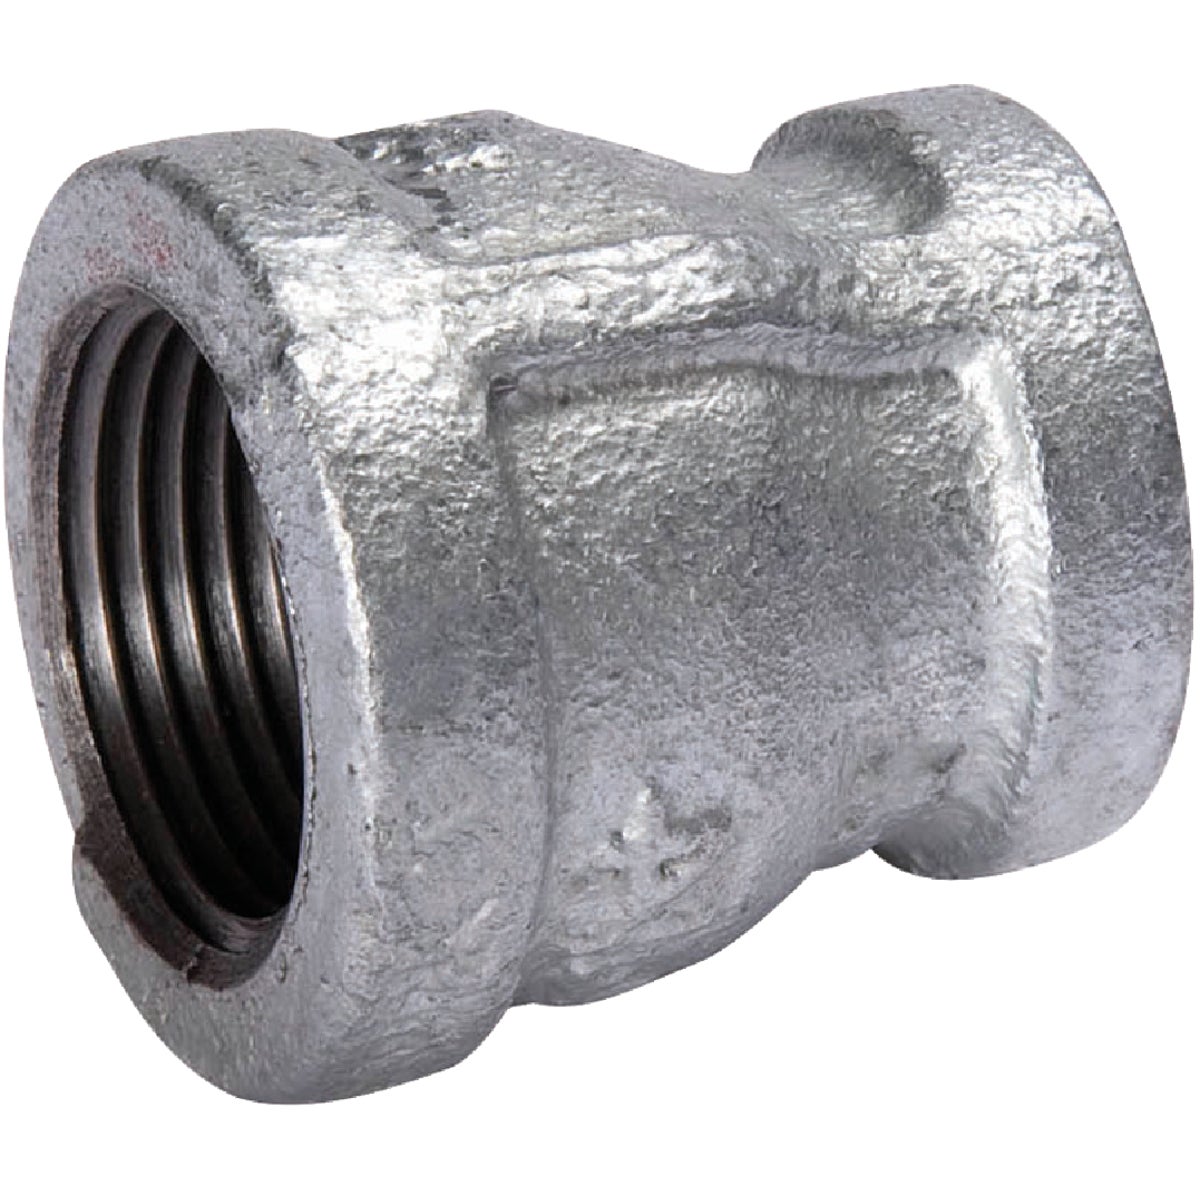 Southland 3/4 In. x 3/8 In. FPT Reducing Galvanized Coupling